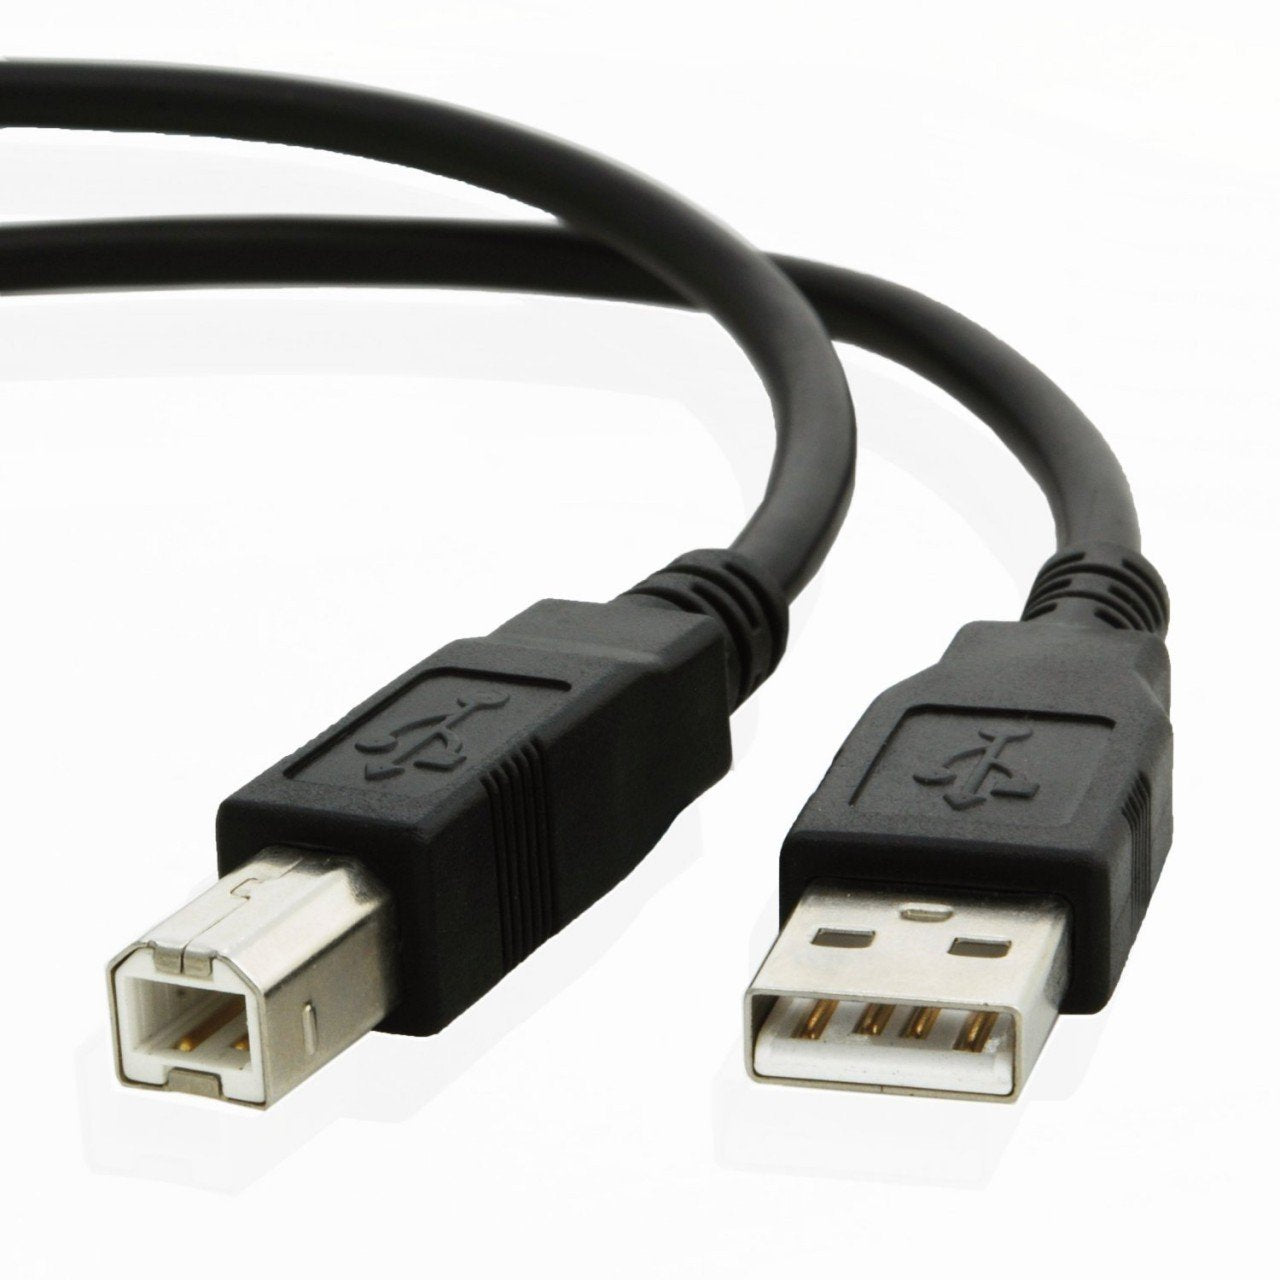 USB cable for Canon PIXMA MG5400